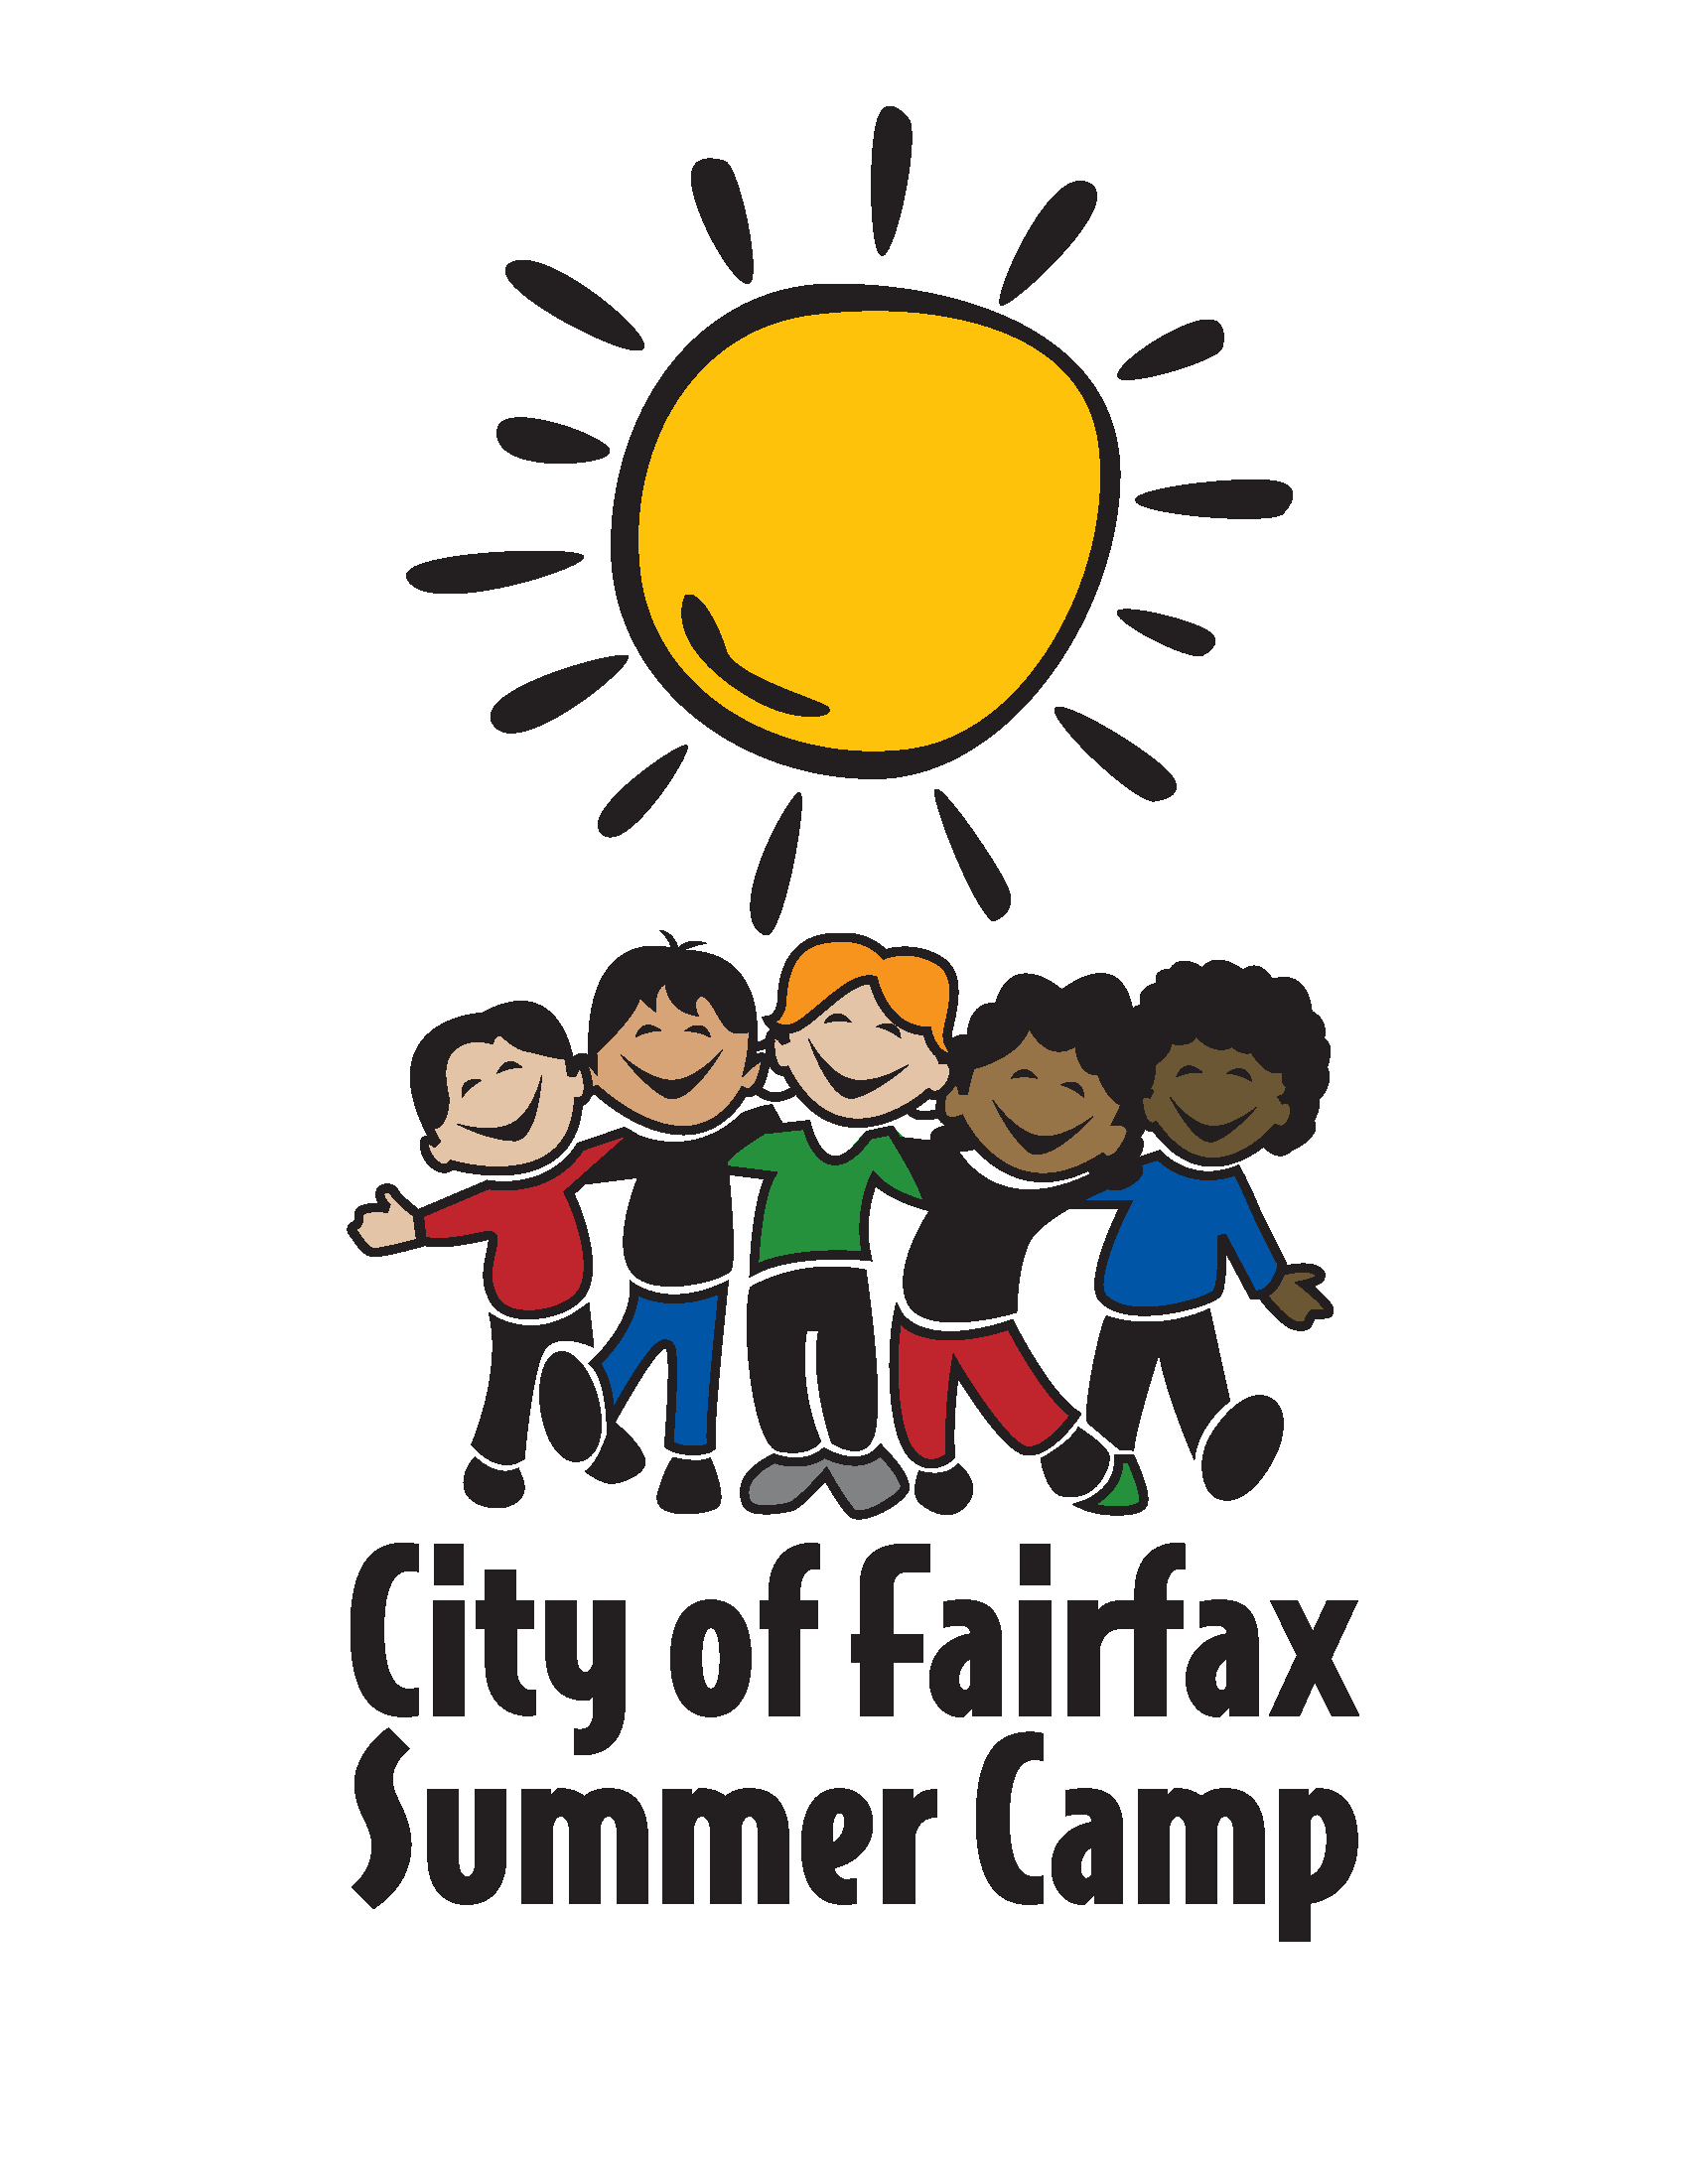 Here's Our Directory of Northern Virginia's Best Summer Camps